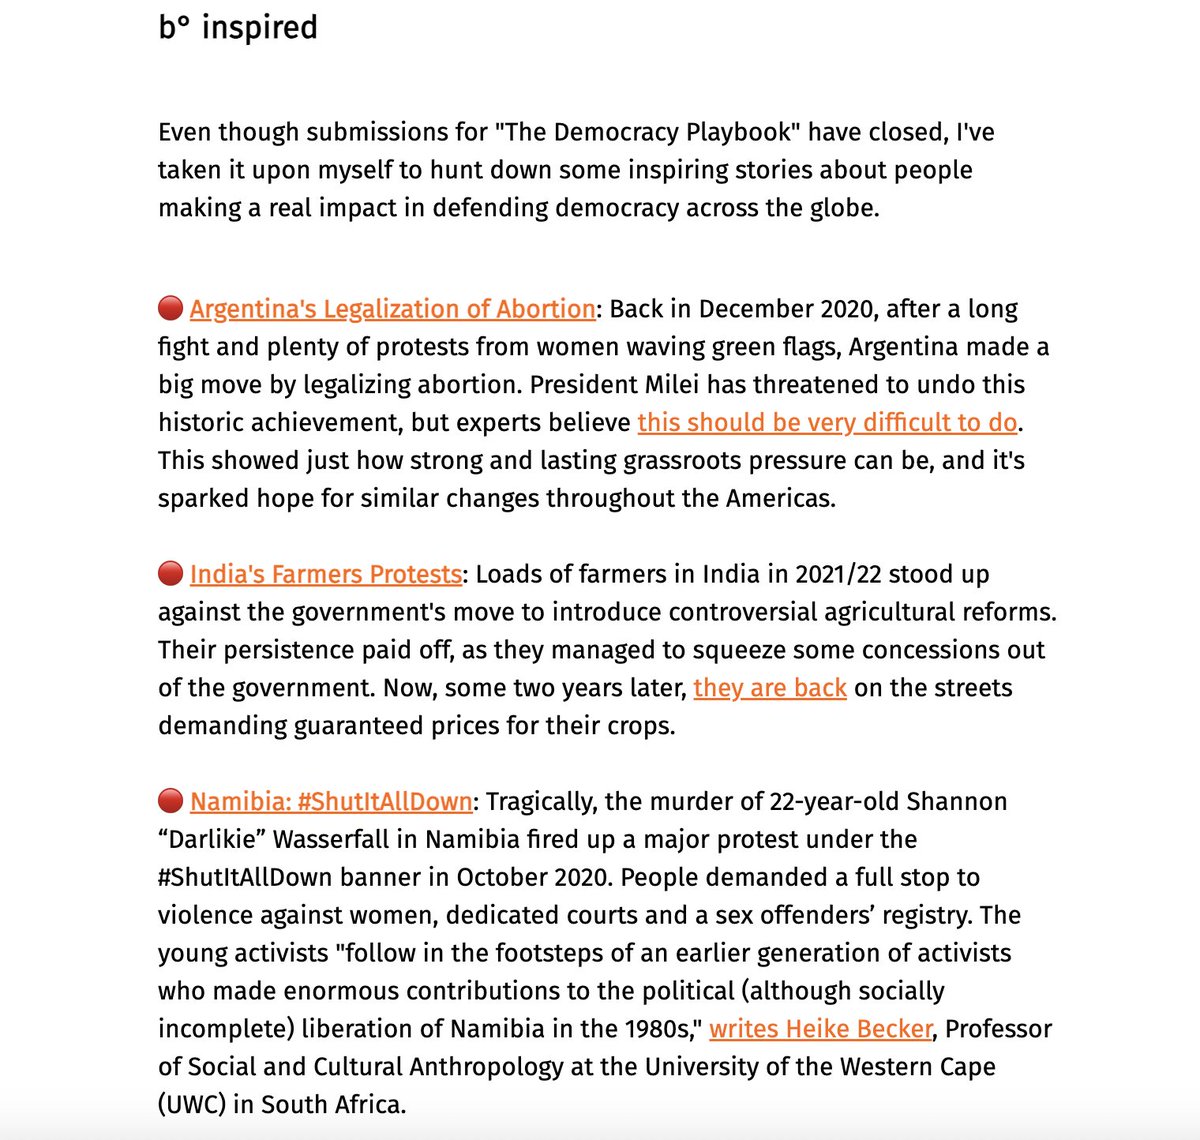 Happy to see our #DemocracyPlaybook project featured in the latest edition of the always excellent @bonninstitute newsletter, with some great examples of democratic movements across the globe gathered by @sham_jaff! Sign up for their newsletter here: bonn-institute.org/newsletter